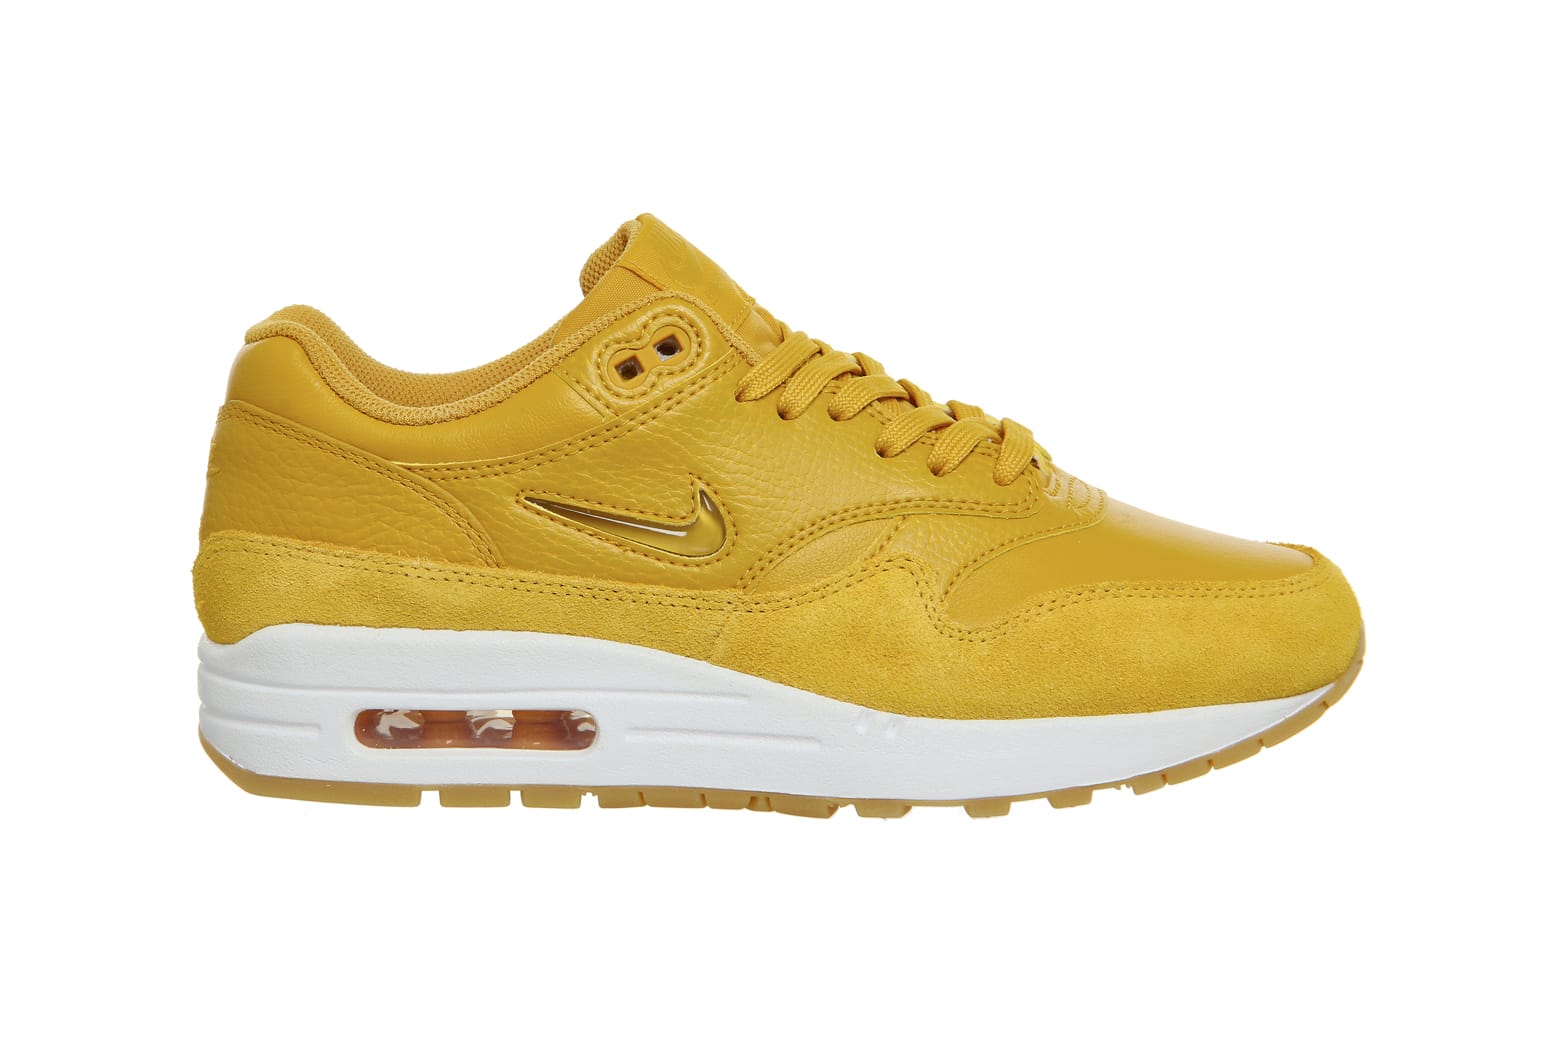 Air Max 1 Jewel in Mineral Yellow 